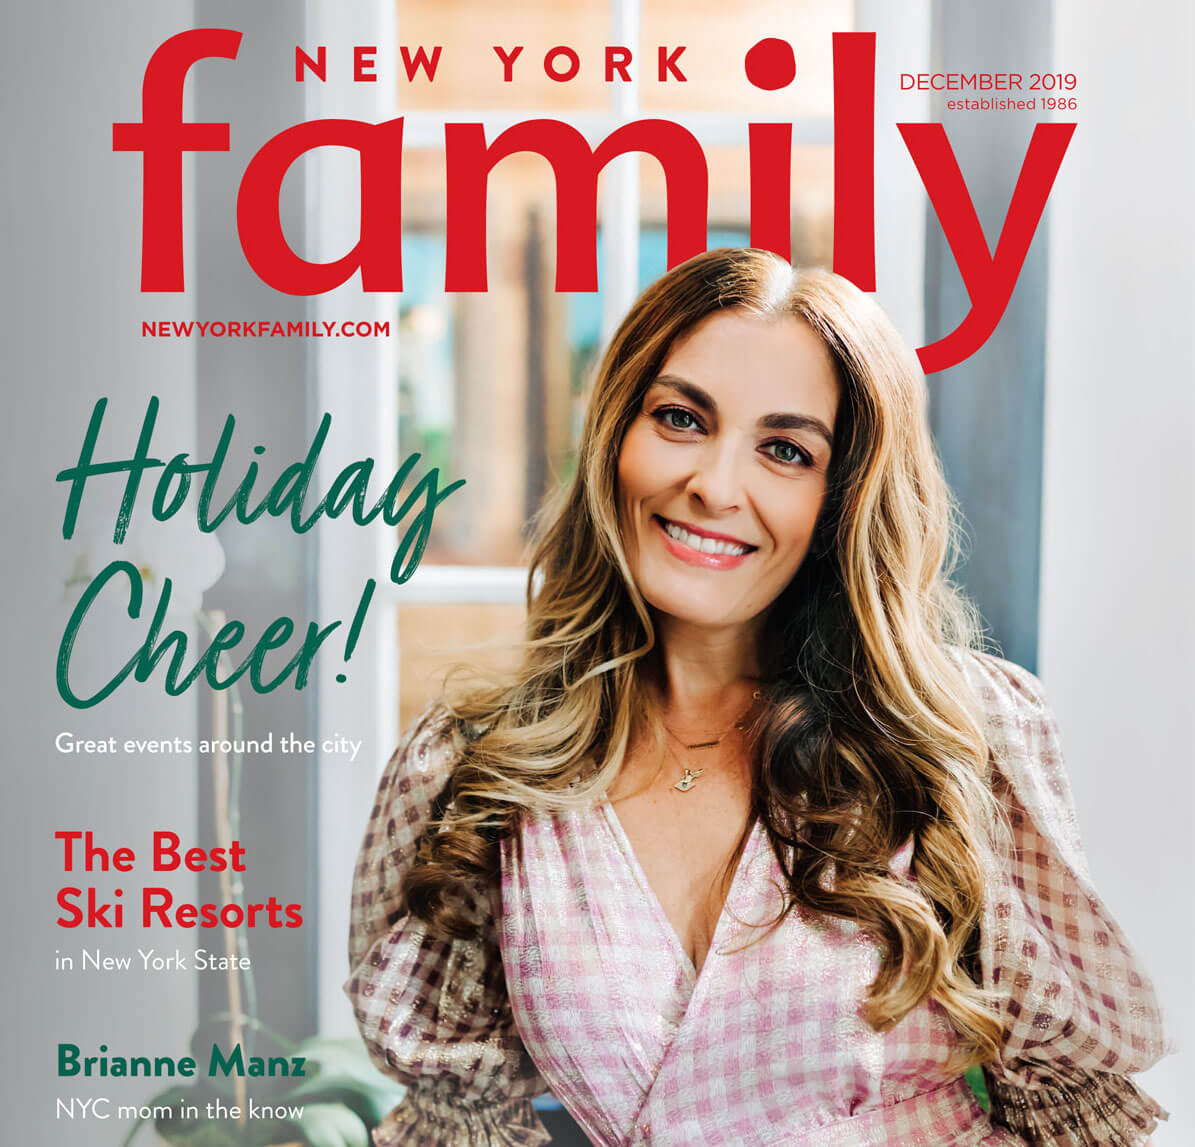 The December 2019 Issue of New York Family